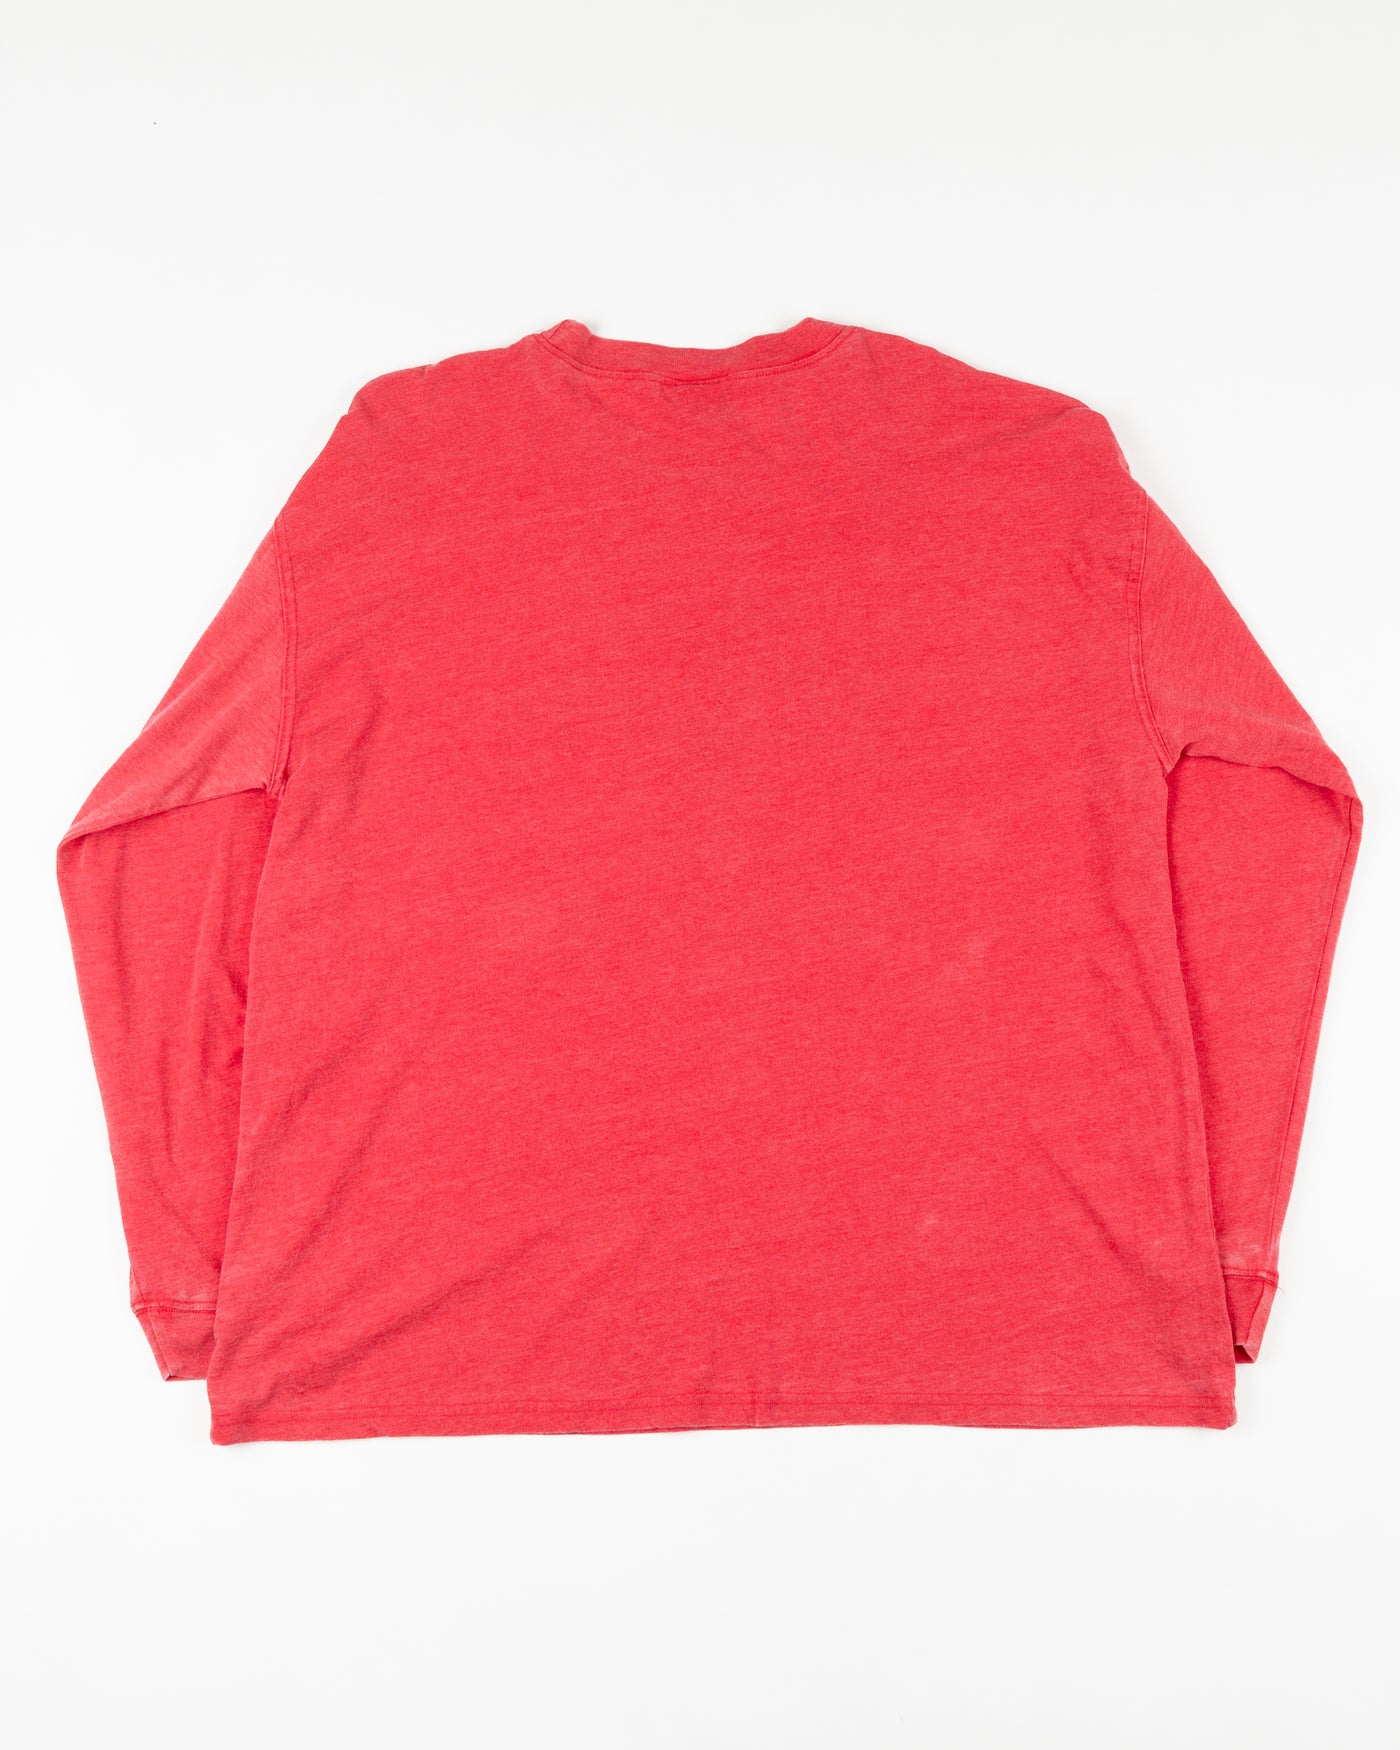 red ladies chicka-d long sleeve tee with Chicago Blackhawks graphic across front - back lay flat